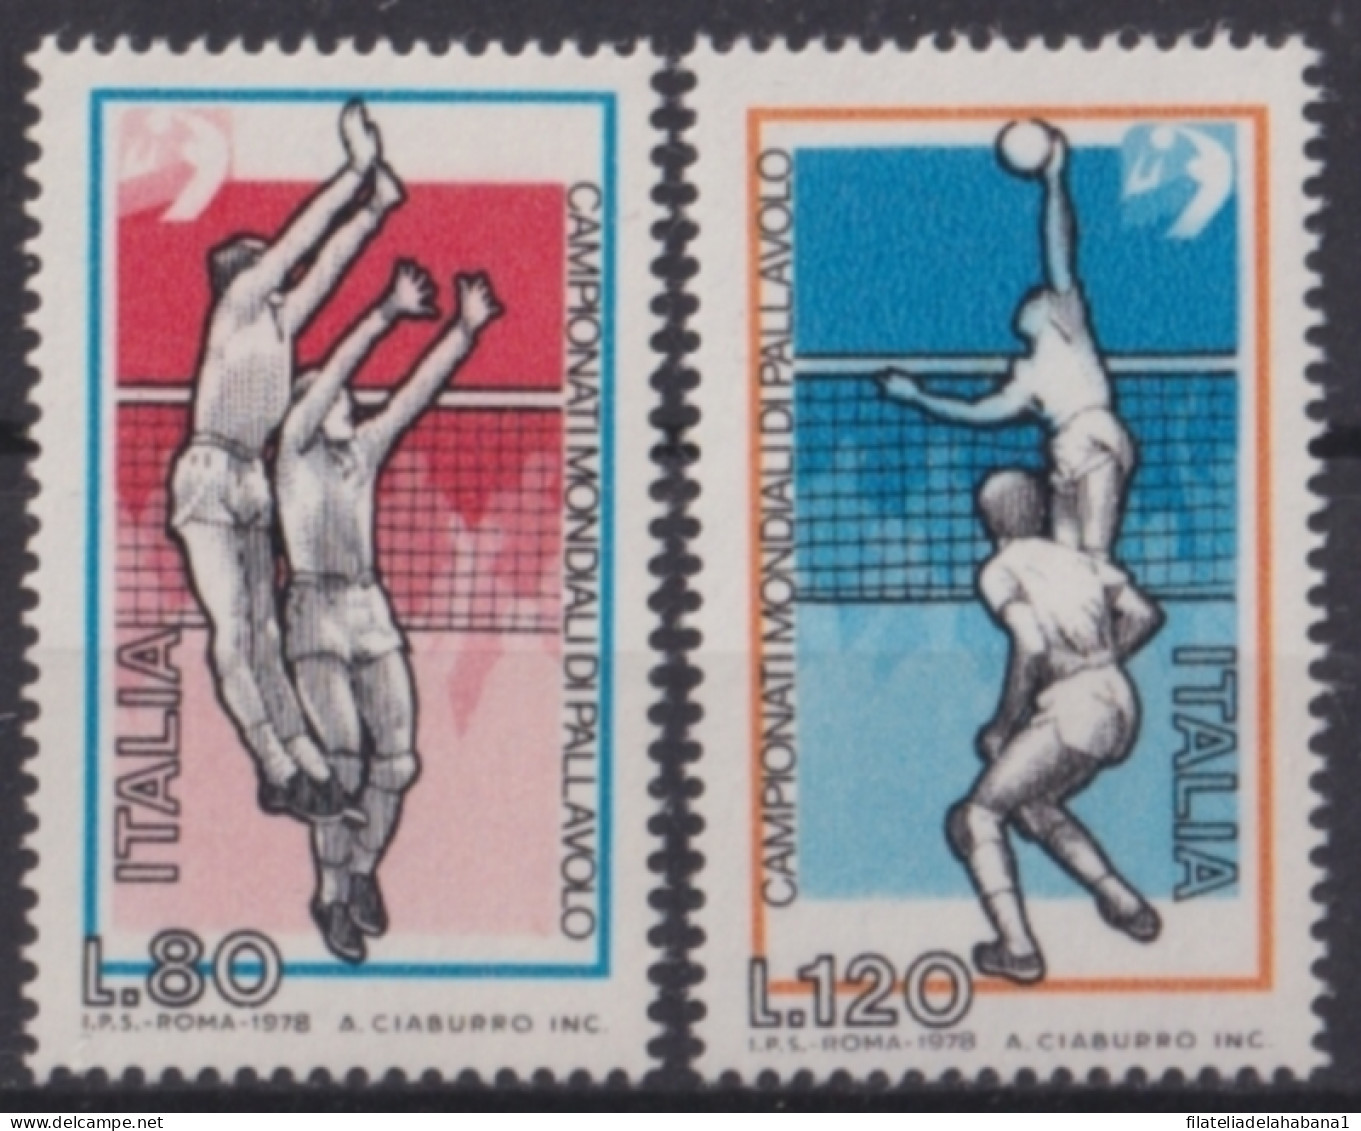 F-EX48220 ITALY MNH 1978 WORLD CHAMPIONSHIP OF VOLLEYBALL.  - Volleyball